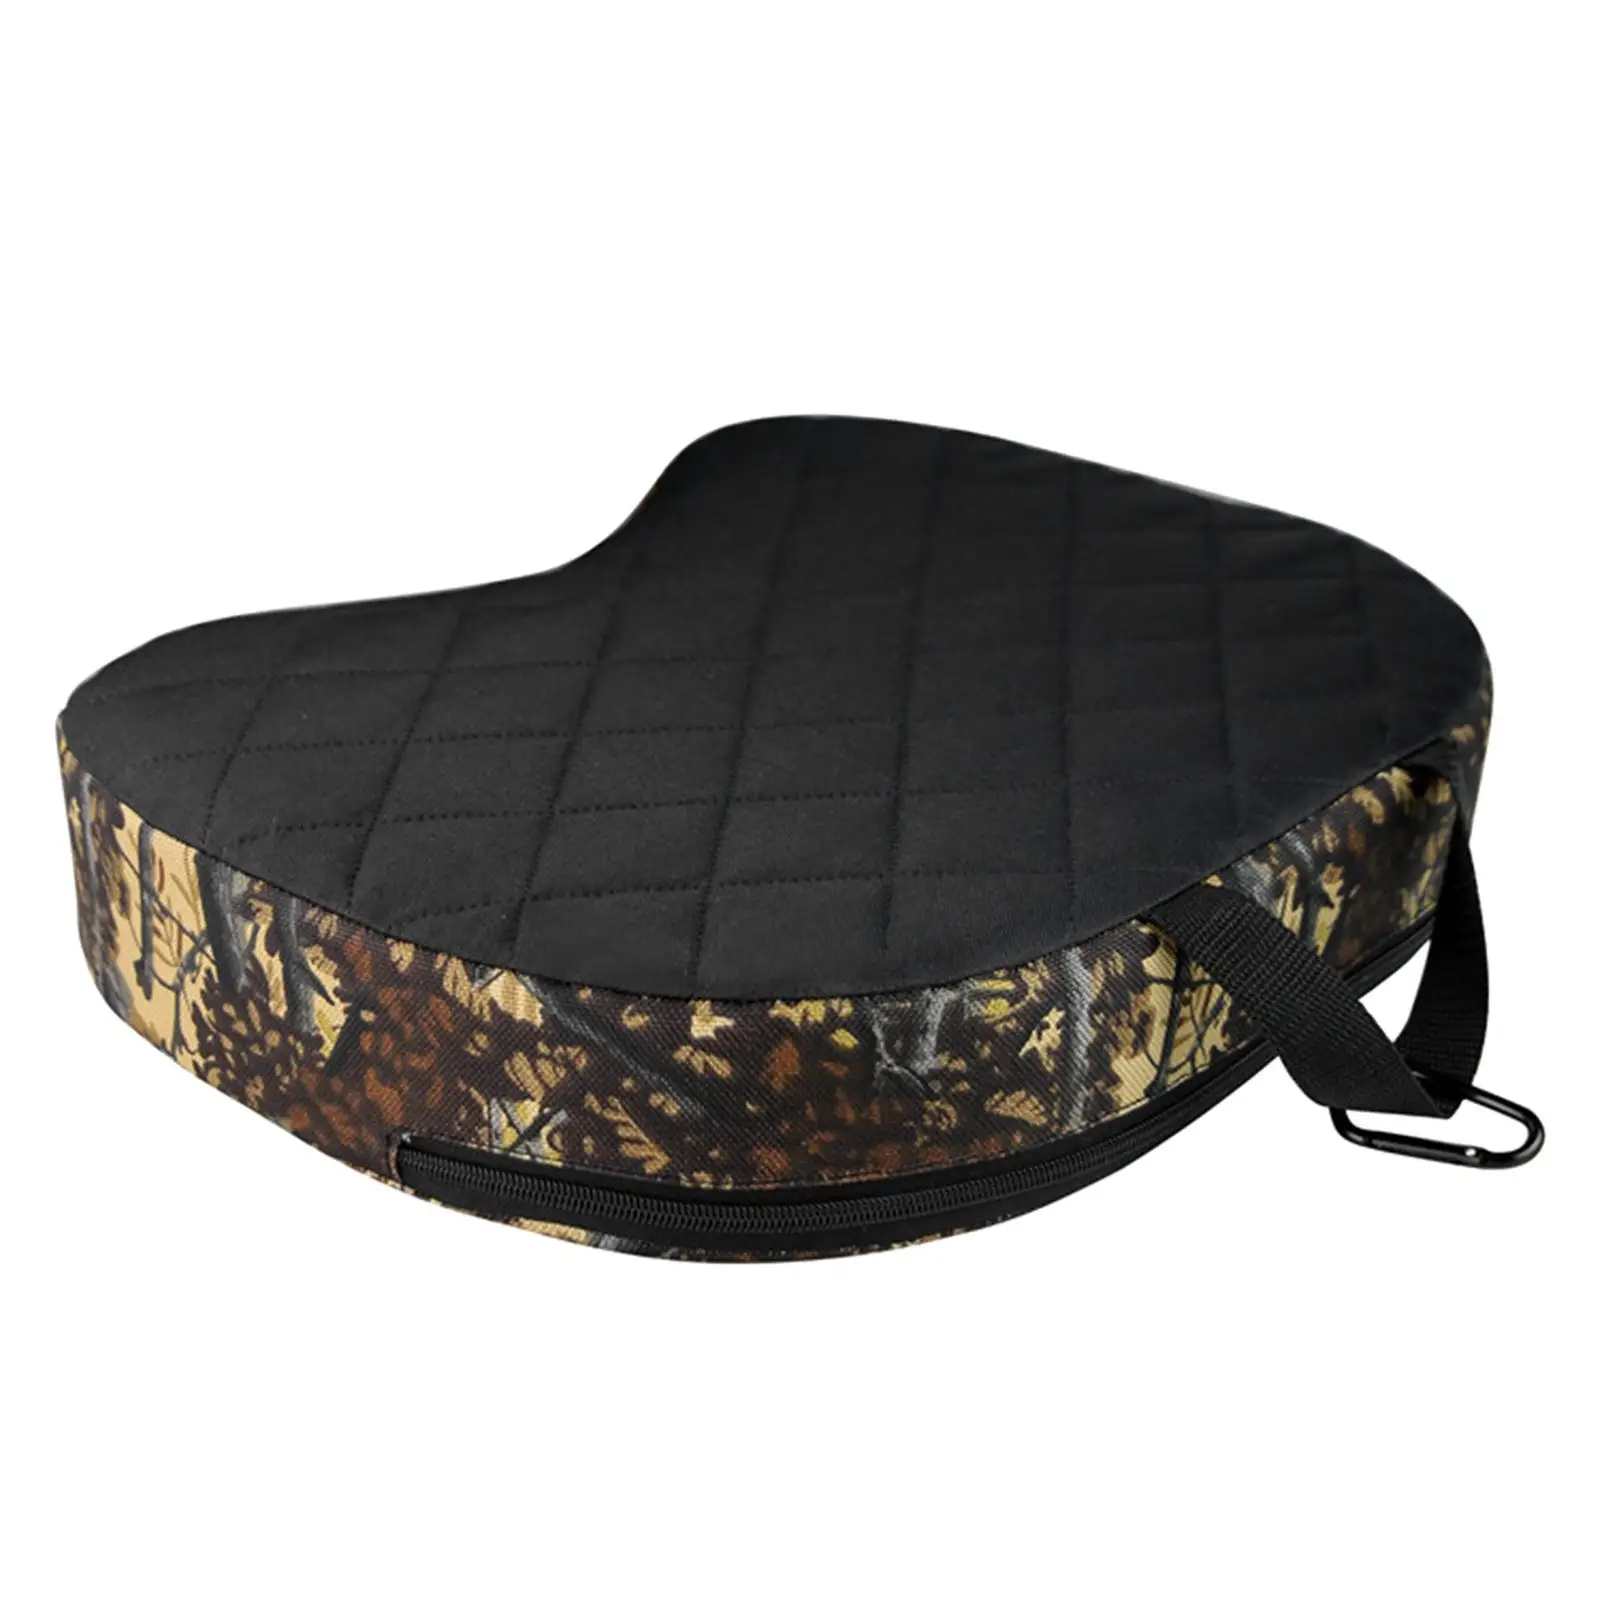 With Handle Camping Cushion Thickened With Carabiner For Gar